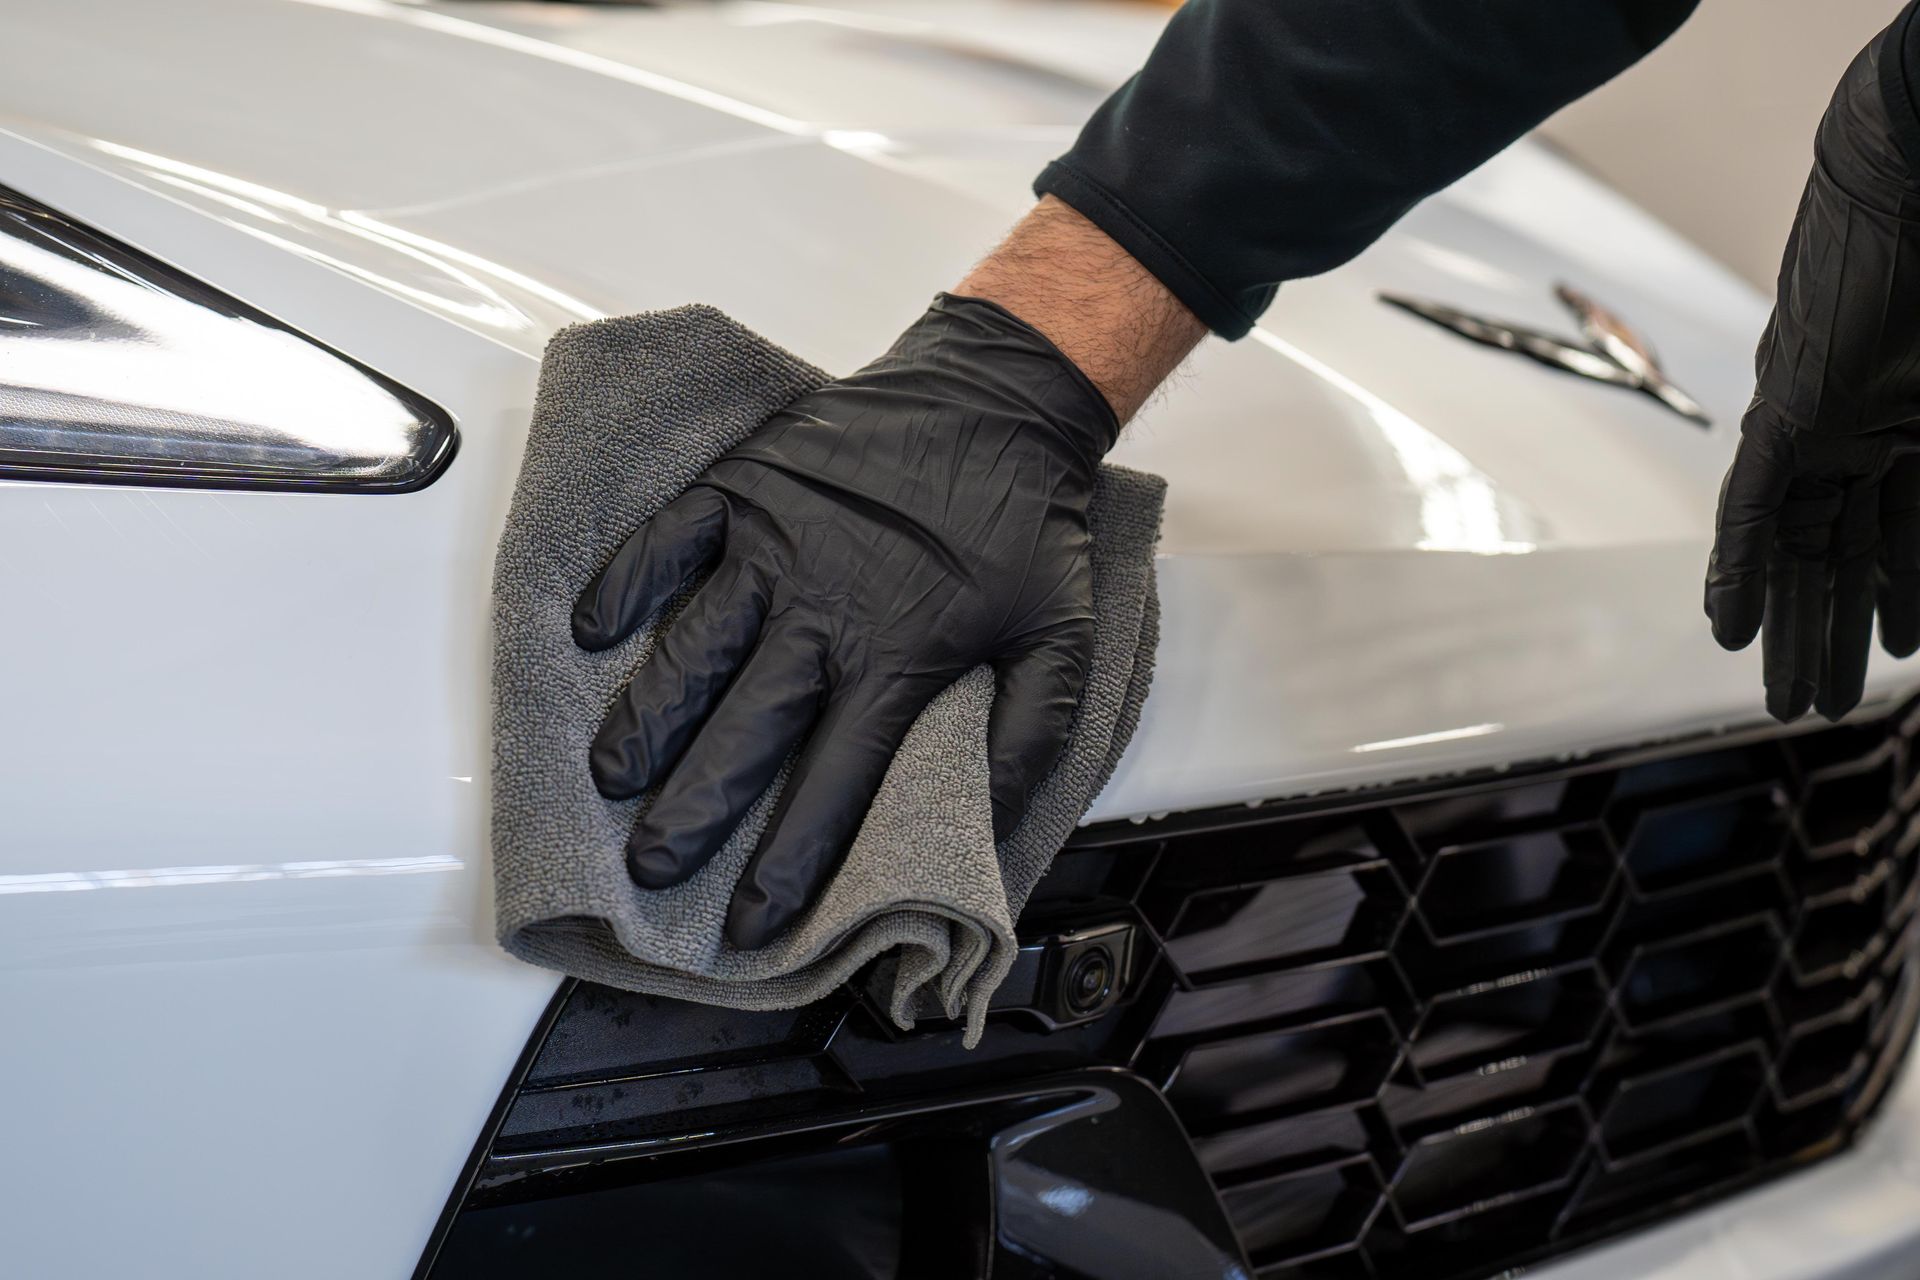 Exterior Detailing - A person wearing black gloves is cleaning a white car with a towel .